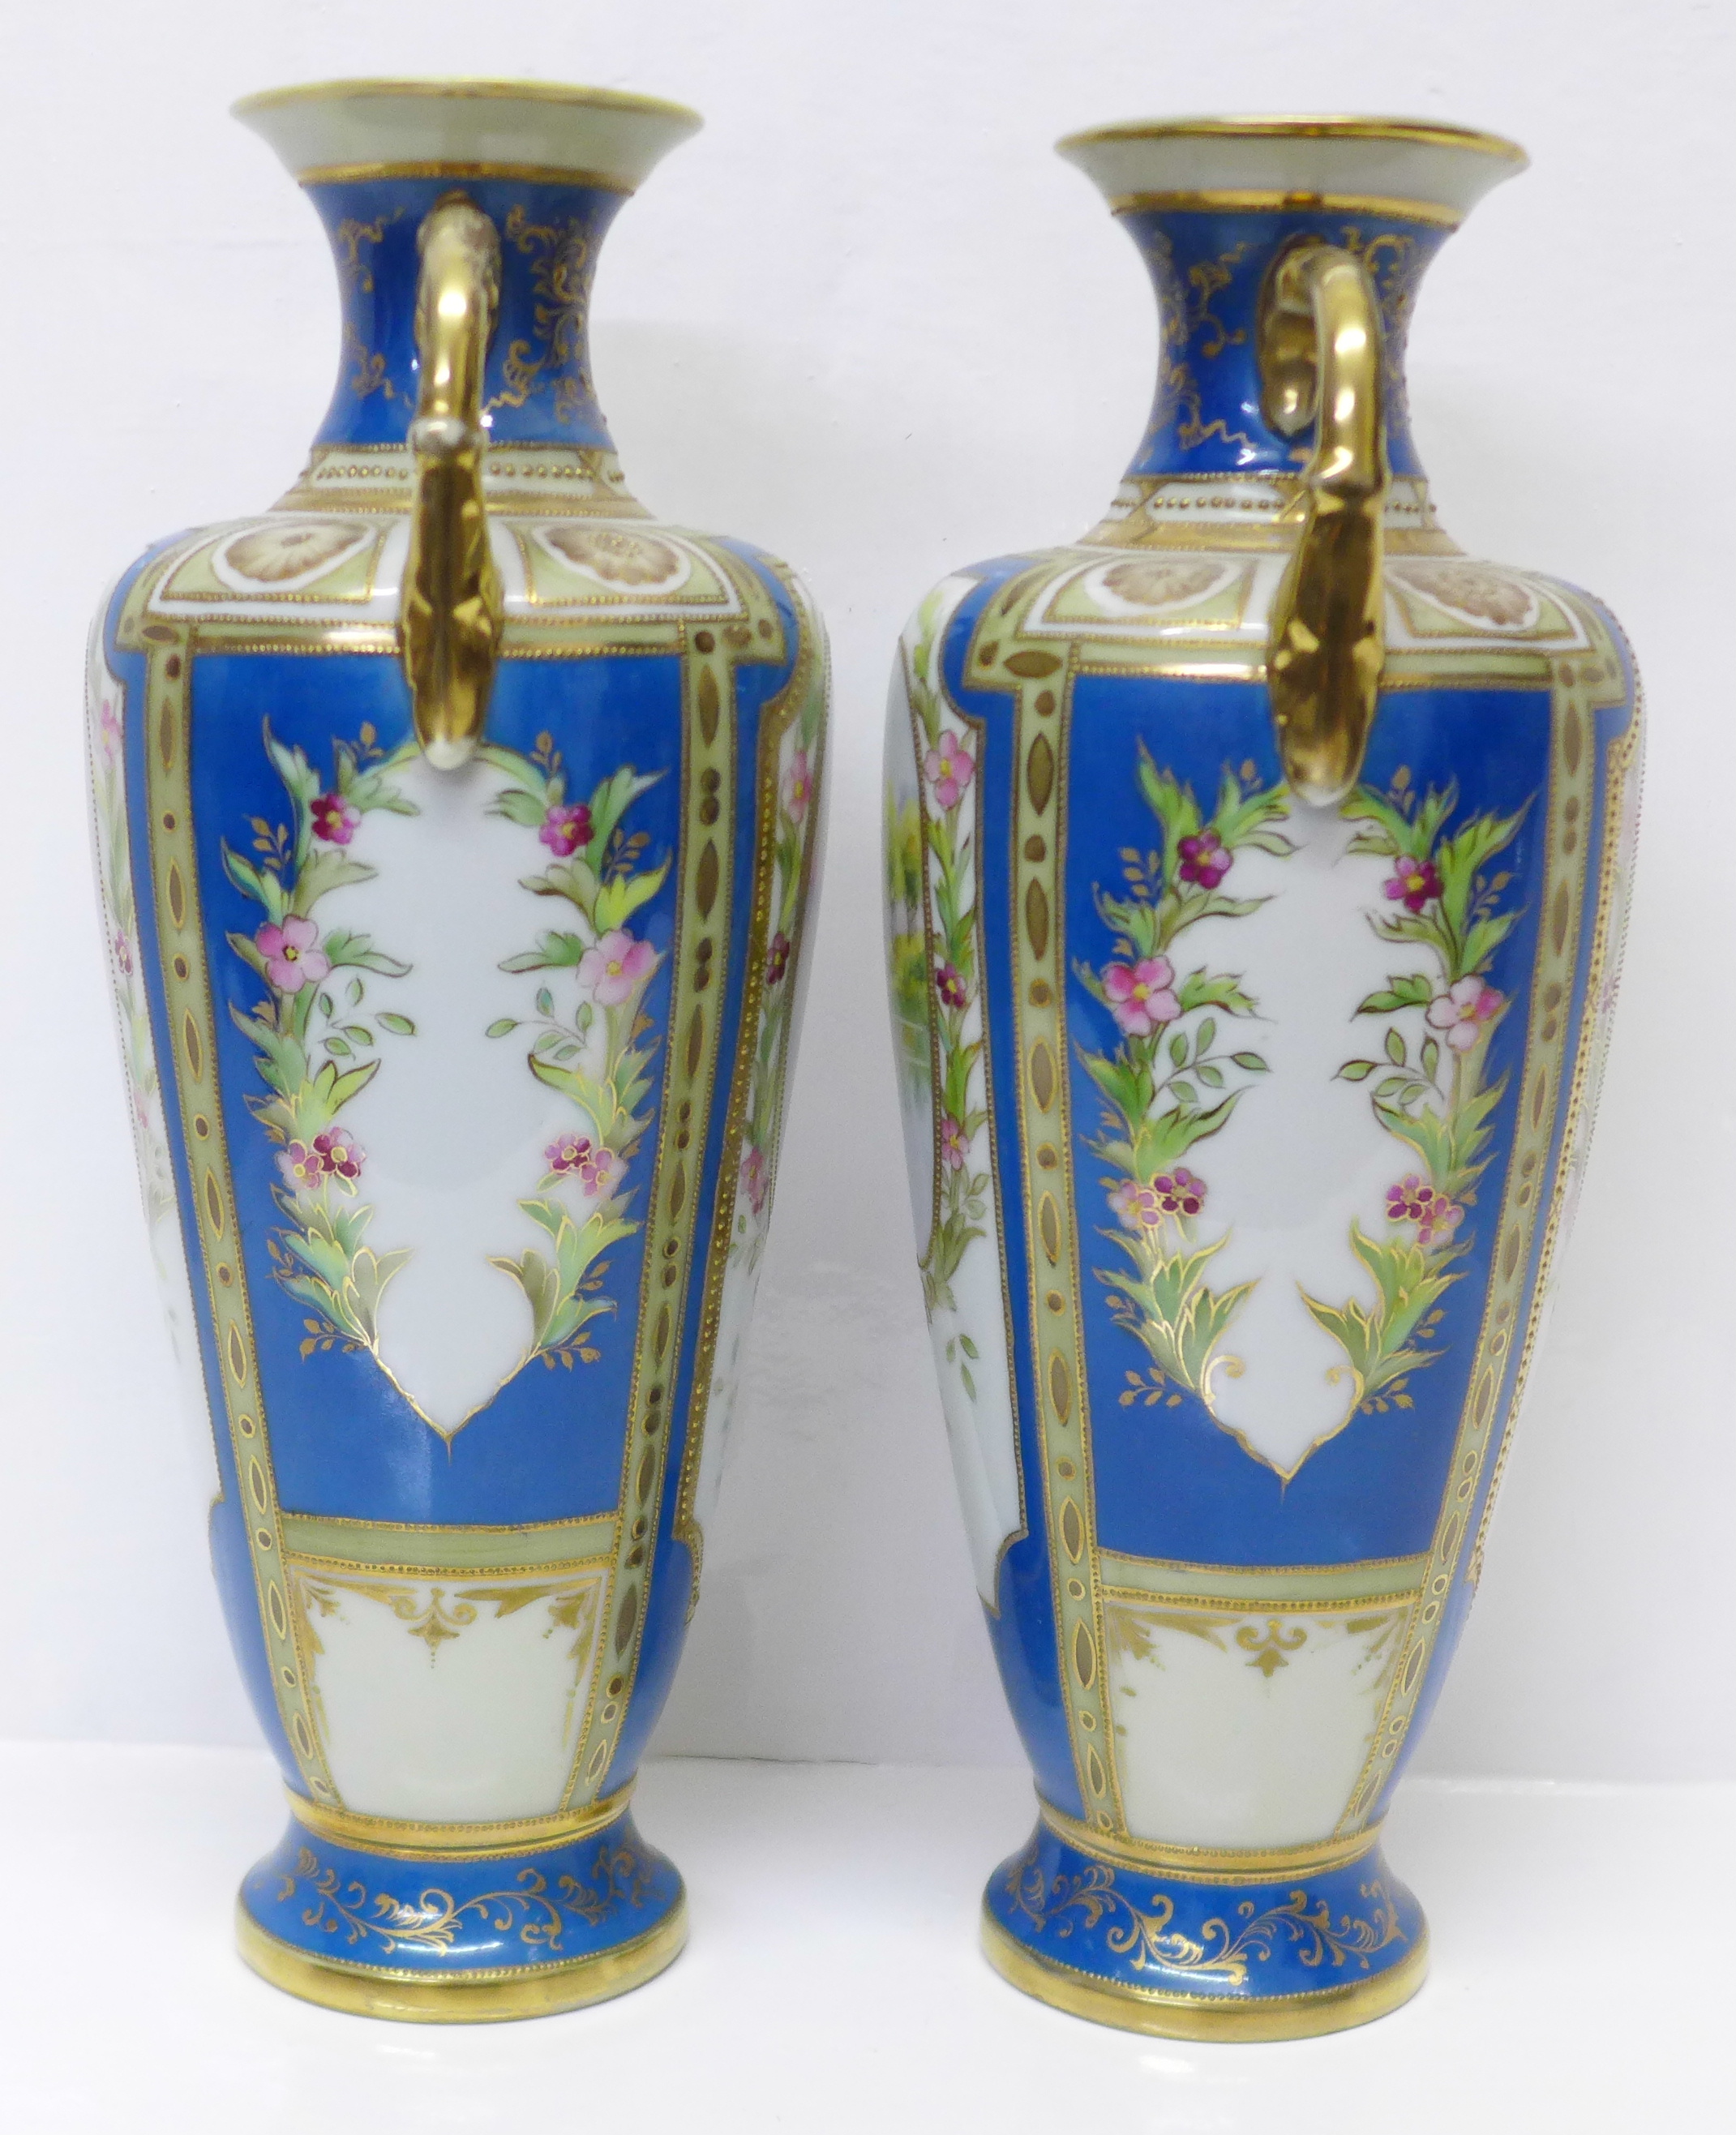 A pair of Noritake vases with gilded decoration and painted panels over a blue ground, 30.5cm - Image 4 of 7